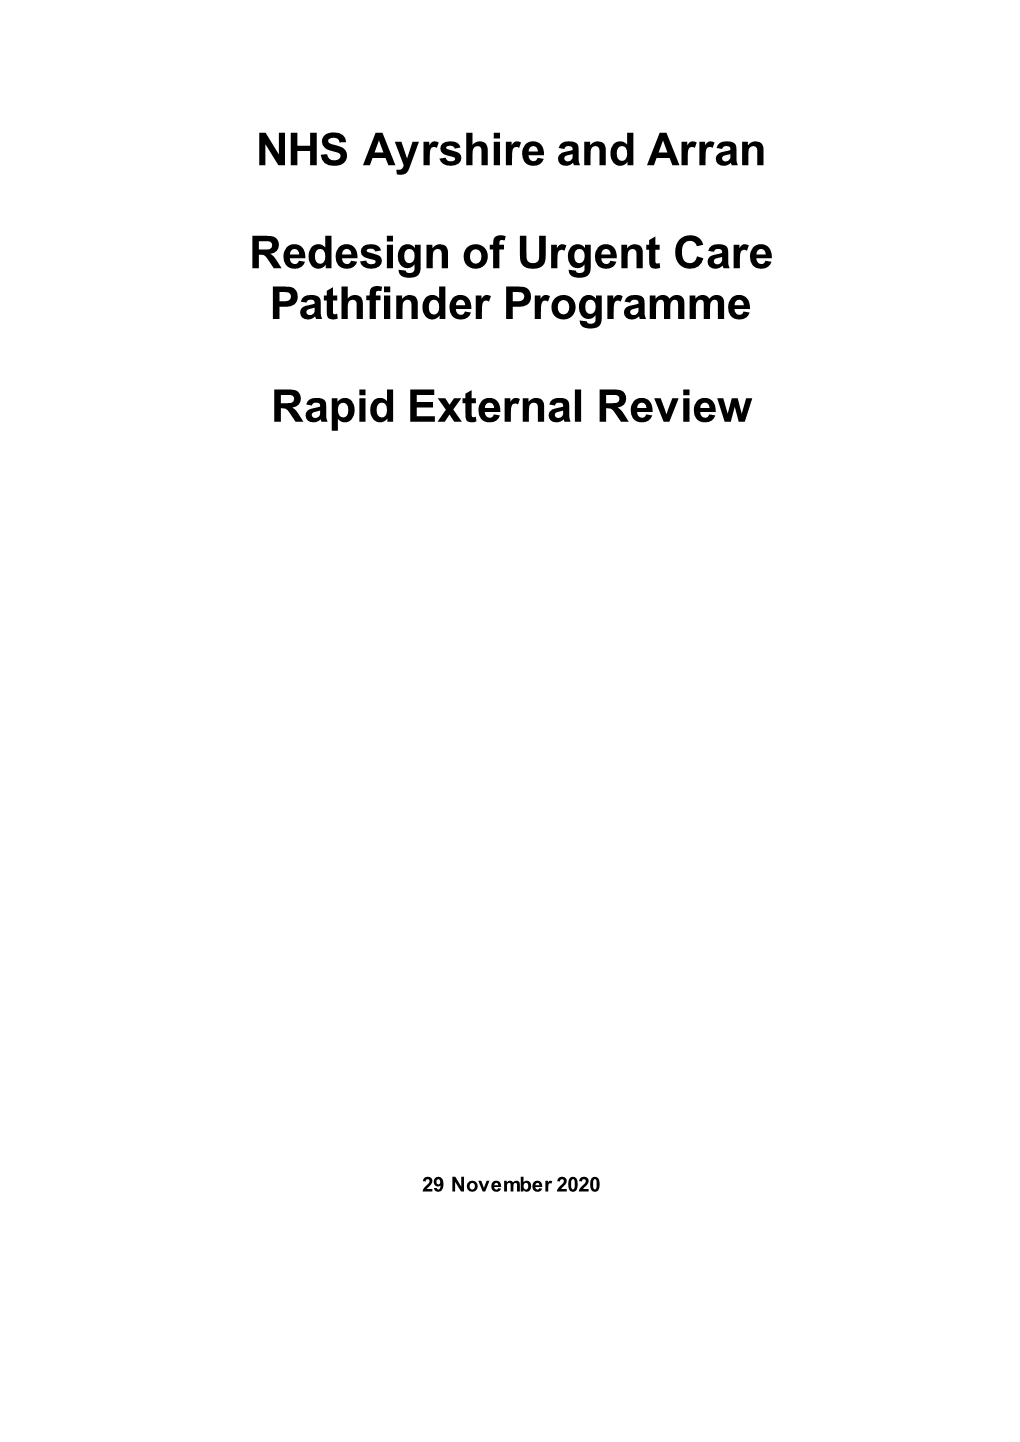 NHS Ayrshire and Arran Redesign of Urgent Care Pathfinder Programme